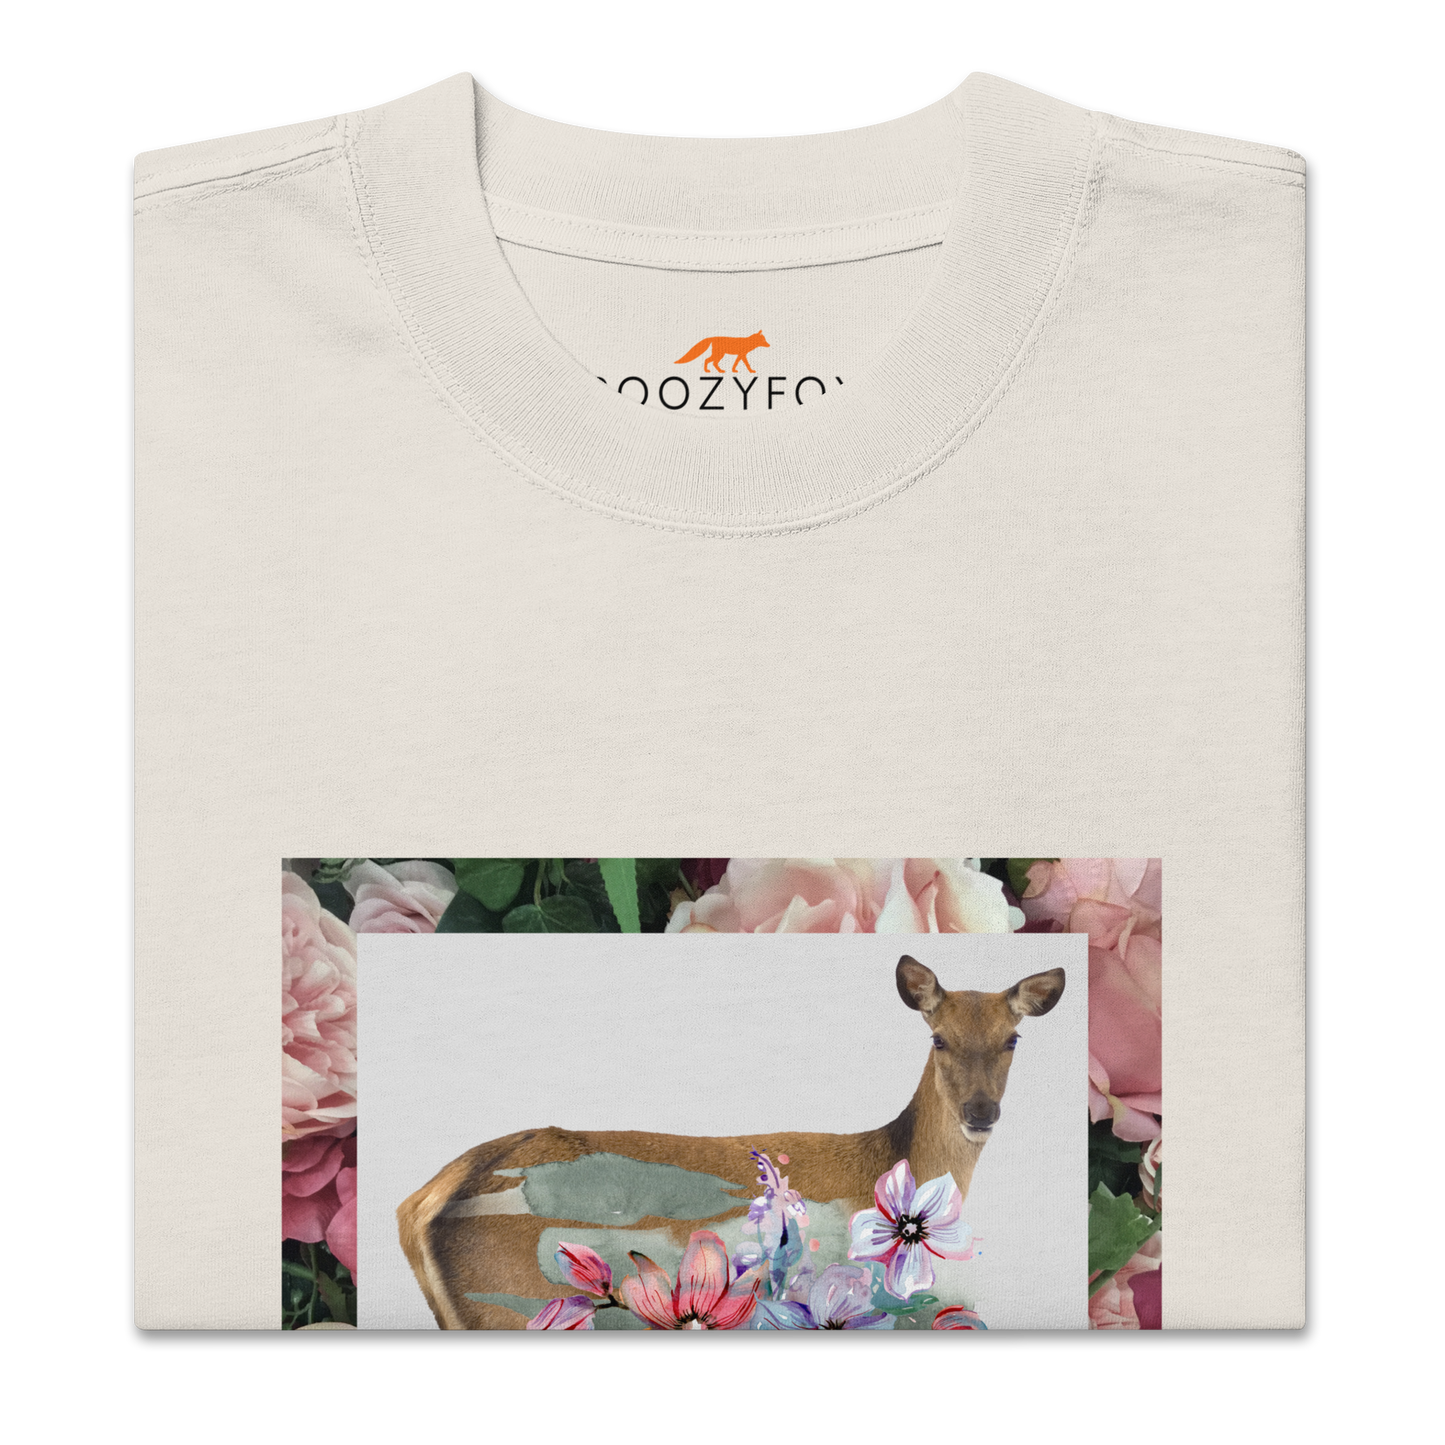 Product details of a Faded Bone Deer Oversized T-Shirt featuring a captivating Floral Deer graphic on the chest - Cute Graphic Deer Oversized Tees - Boozy Fox